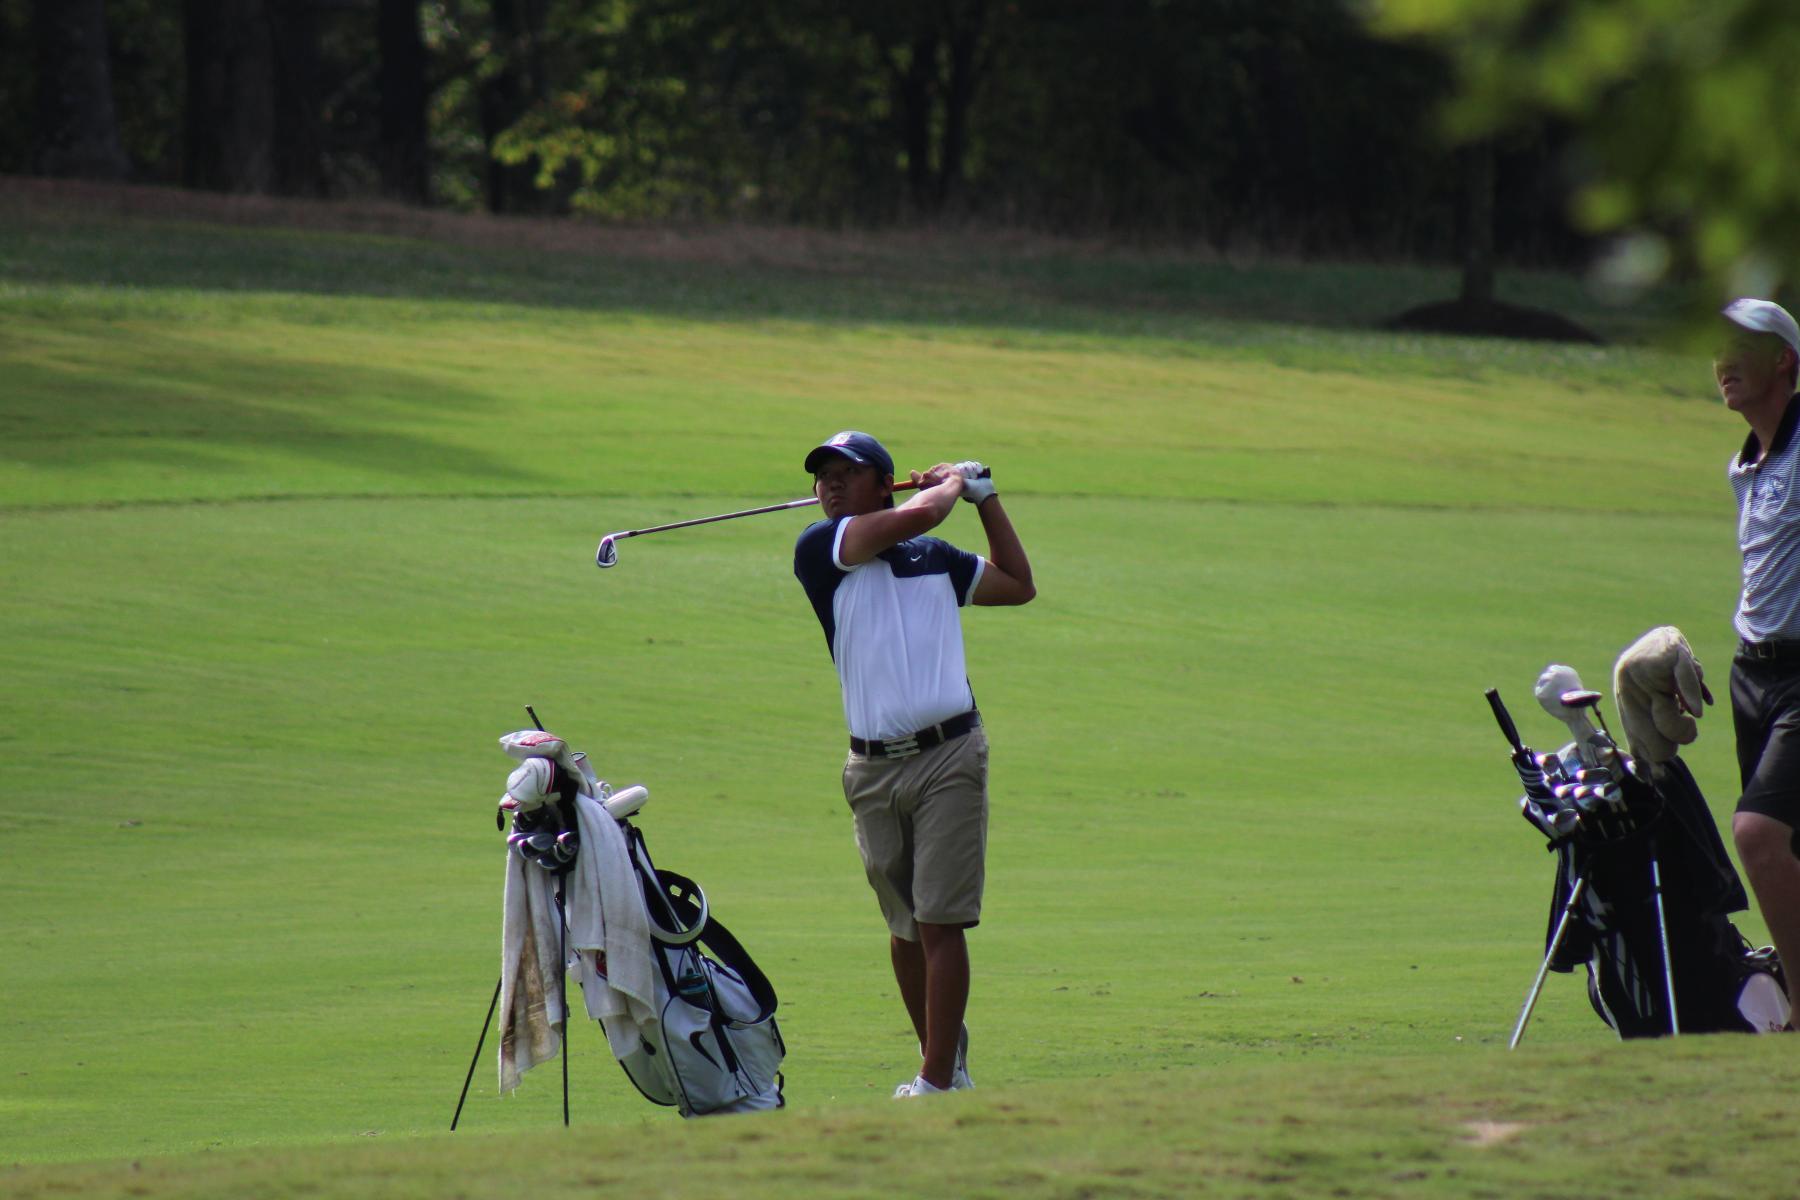 Men’s Golf in 3rd Place After Round One at Myrtle Beach Intercollegiate